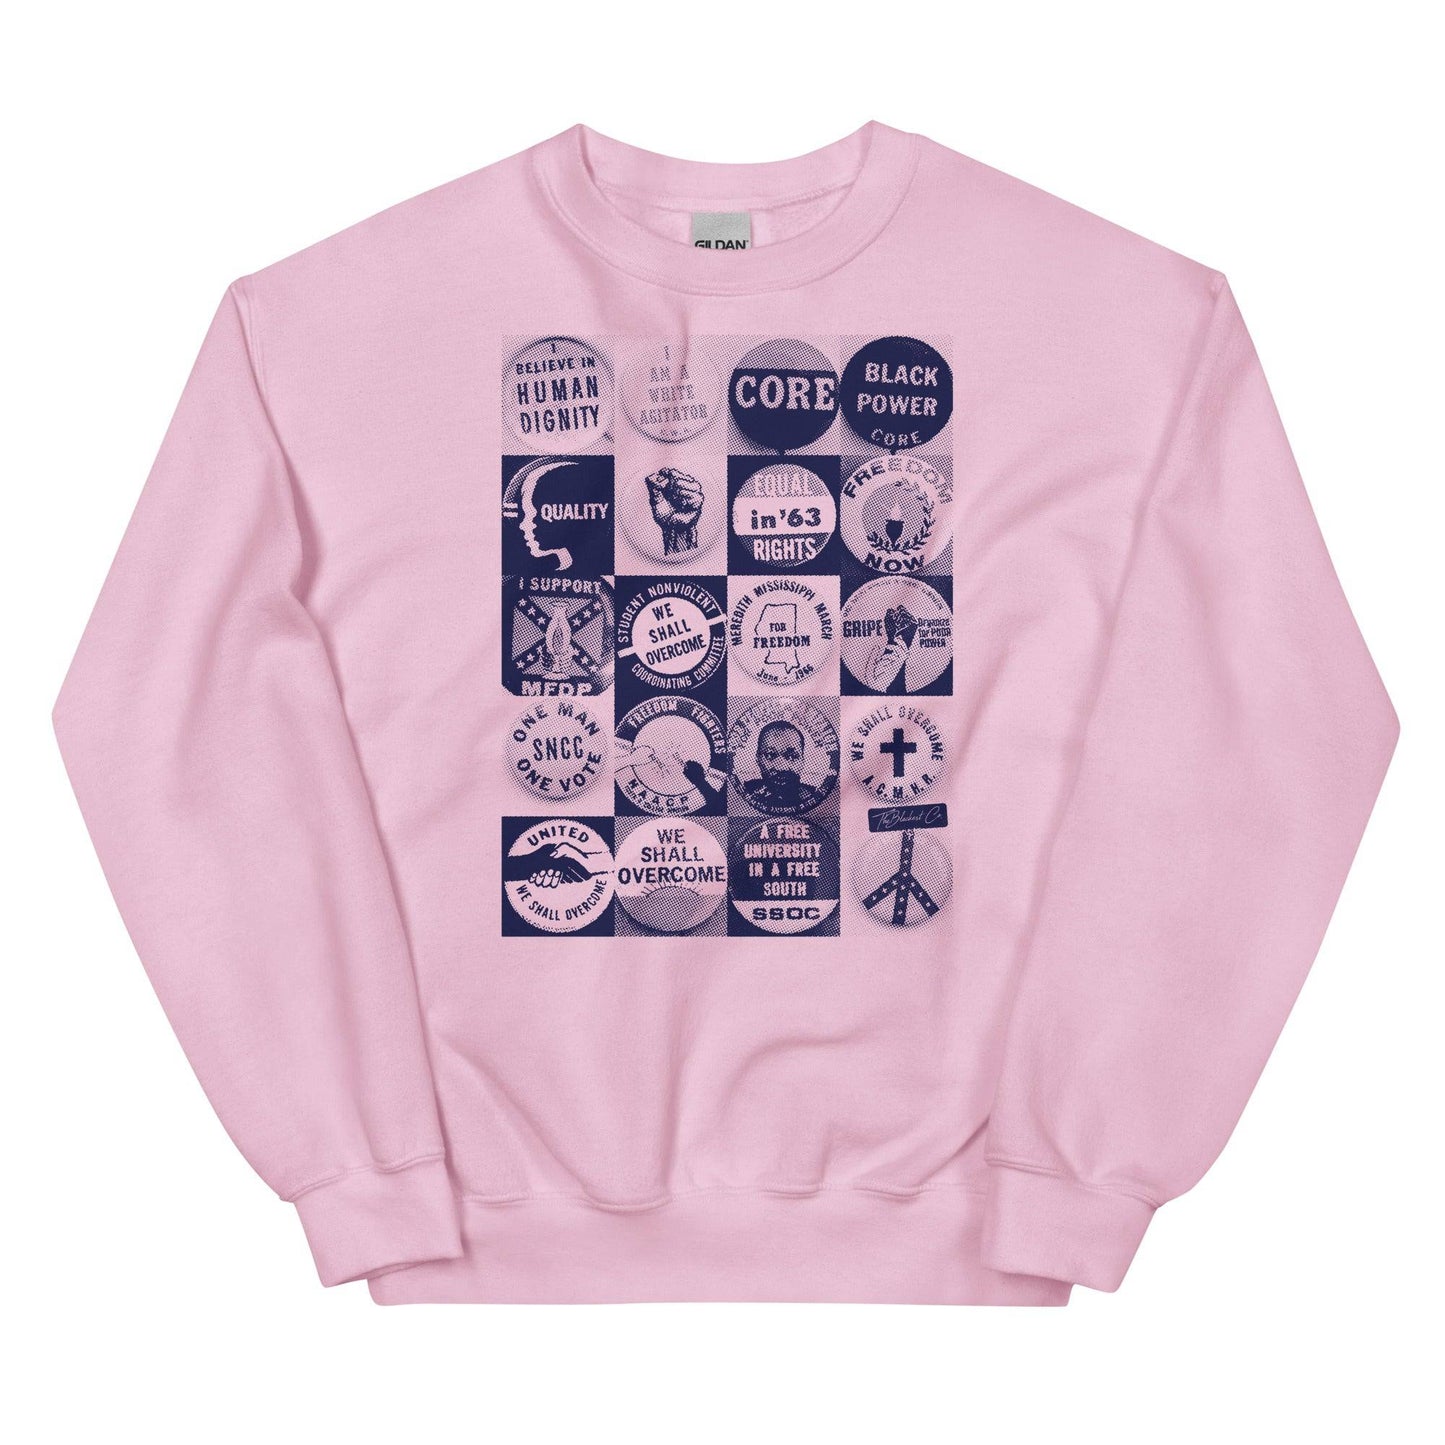 a pink sweatshirt with various civil rights buttons graphics on it